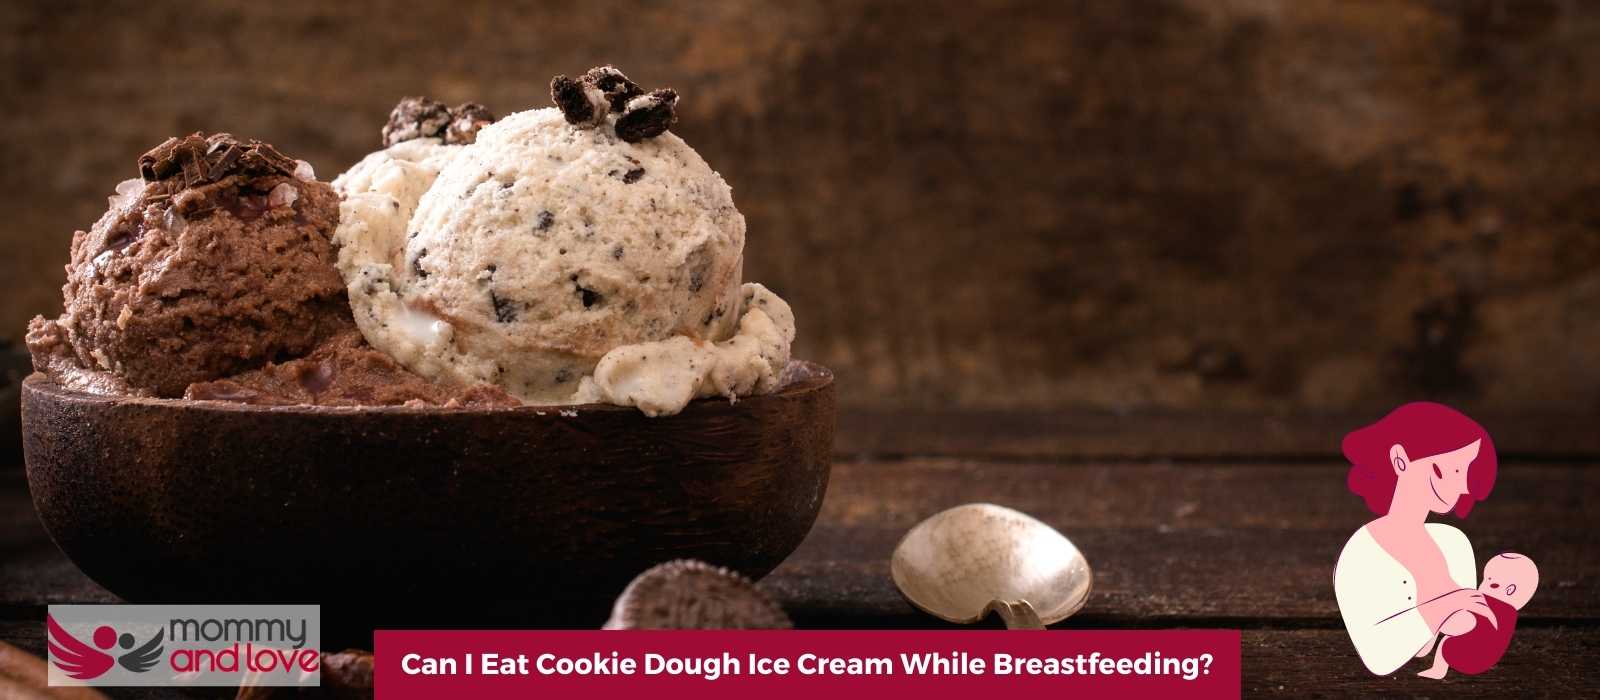 Can I Eat Cookie Dough Ice Cream While Breastfeeding